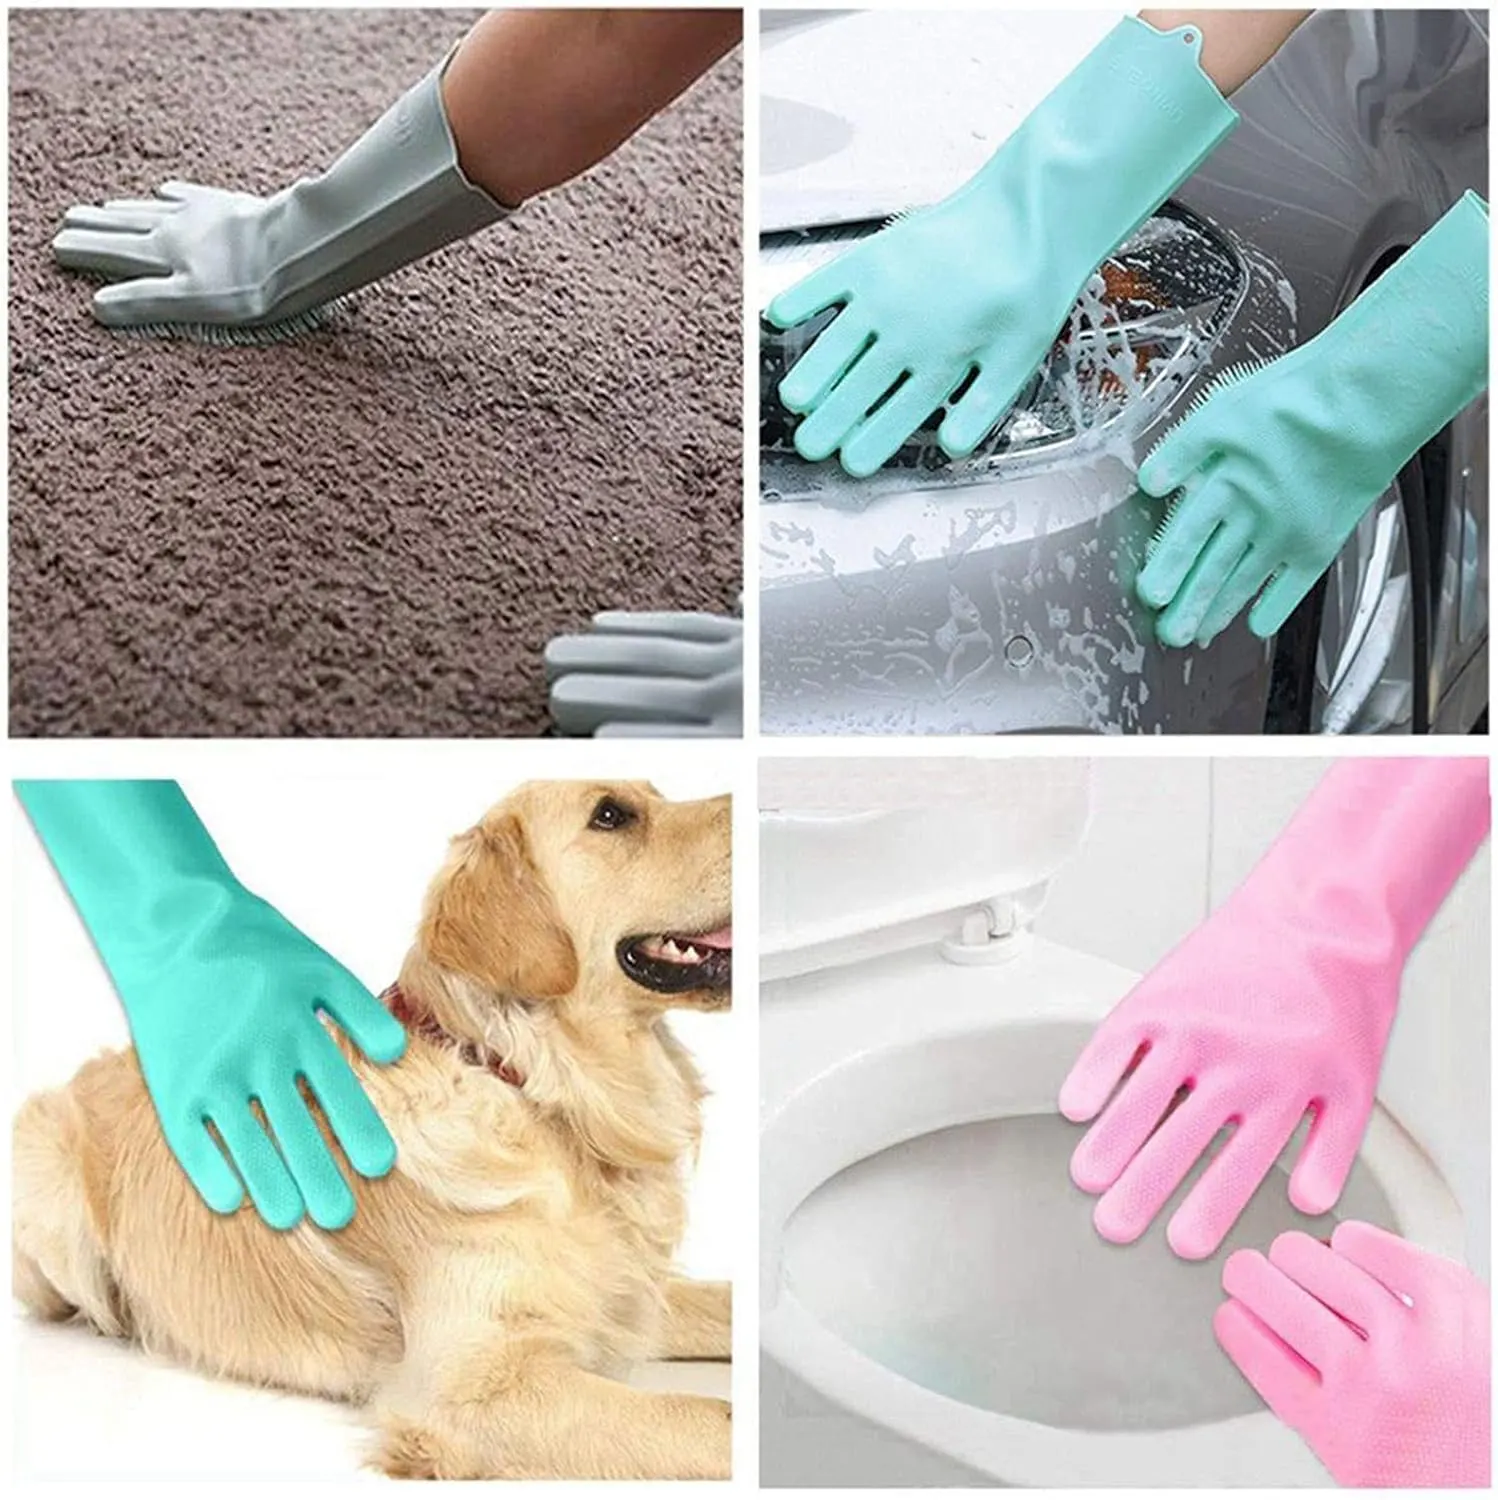 Silicone rubber gloves with multi-use brush, colors